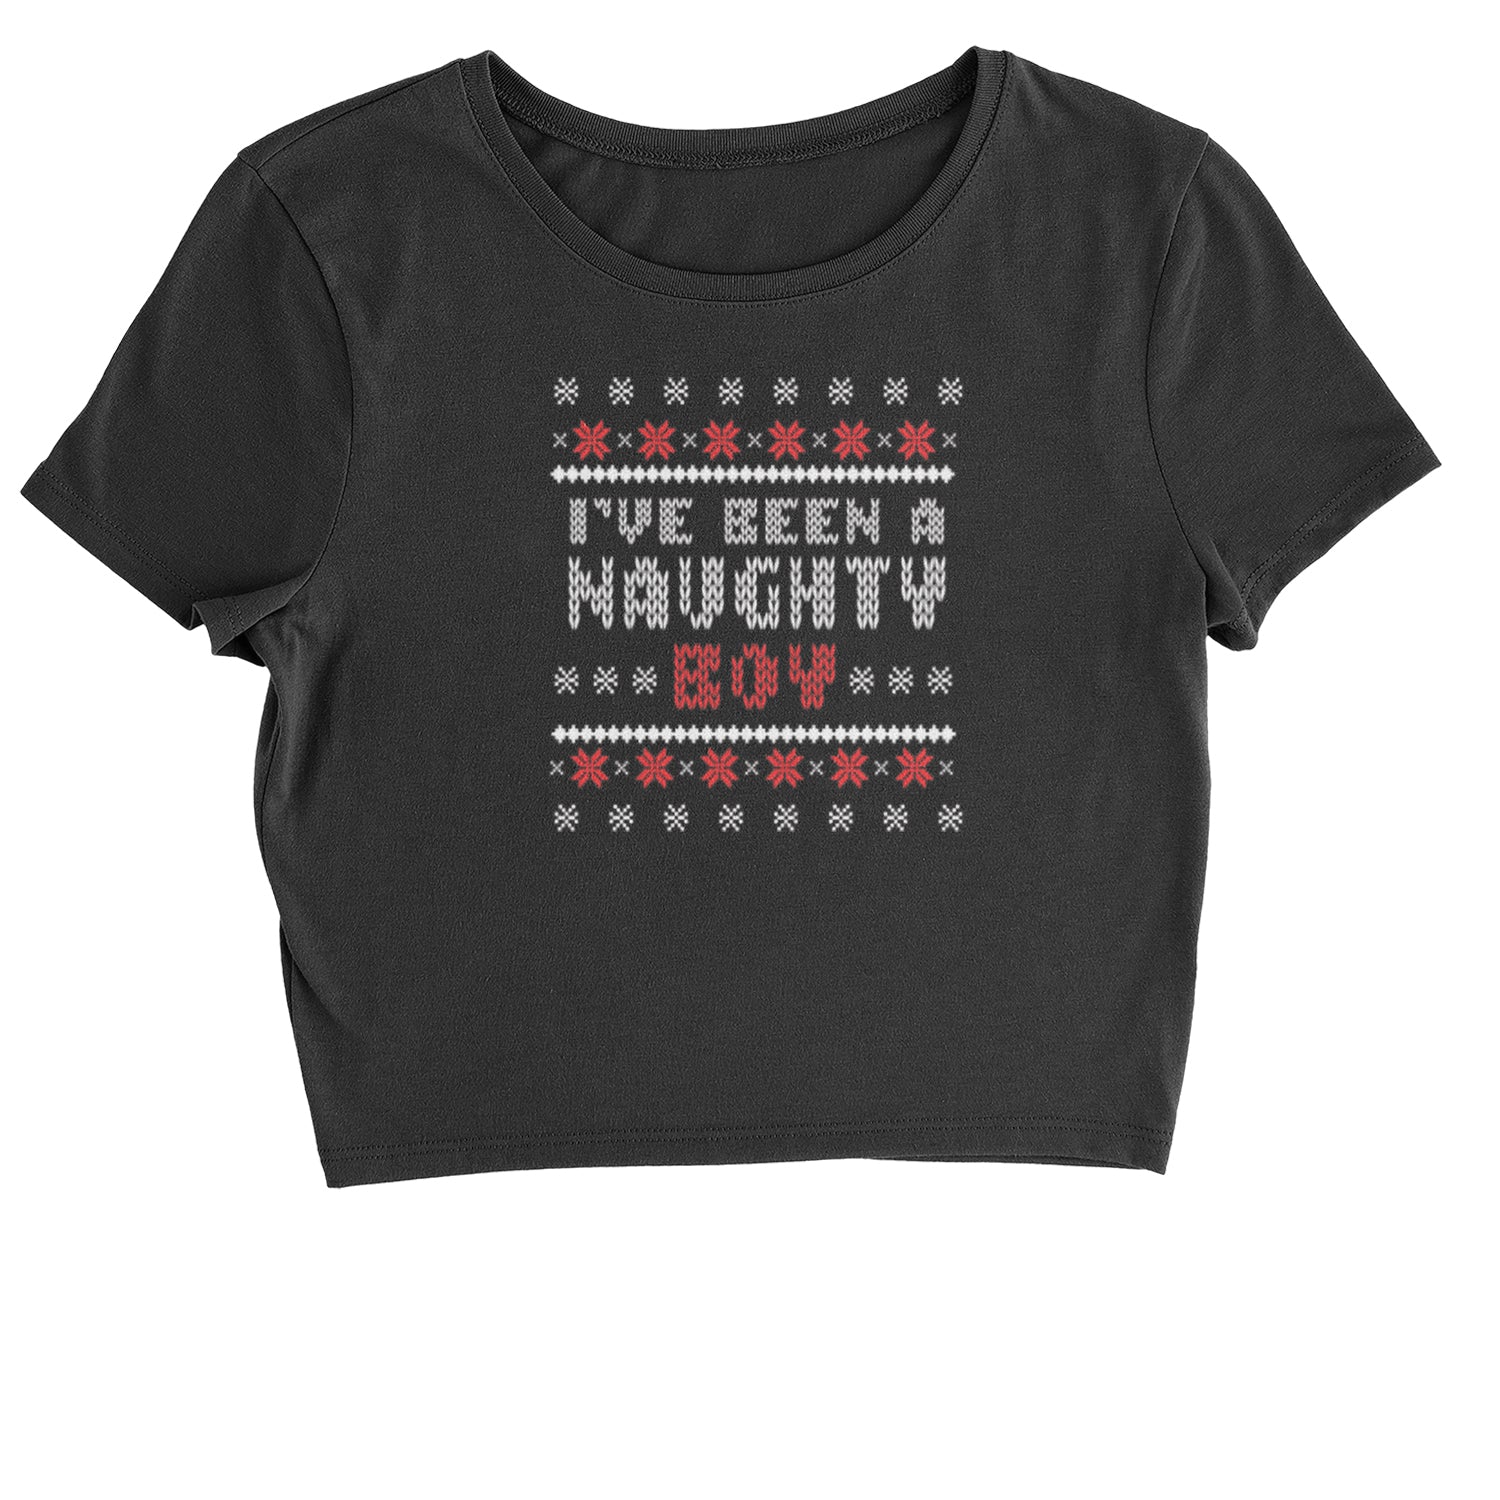 I've Been A Naughty Boy Ugly Christmas Cropped T-Shirt list, naughty, nice, santa, ugly, xmas by Expression Tees